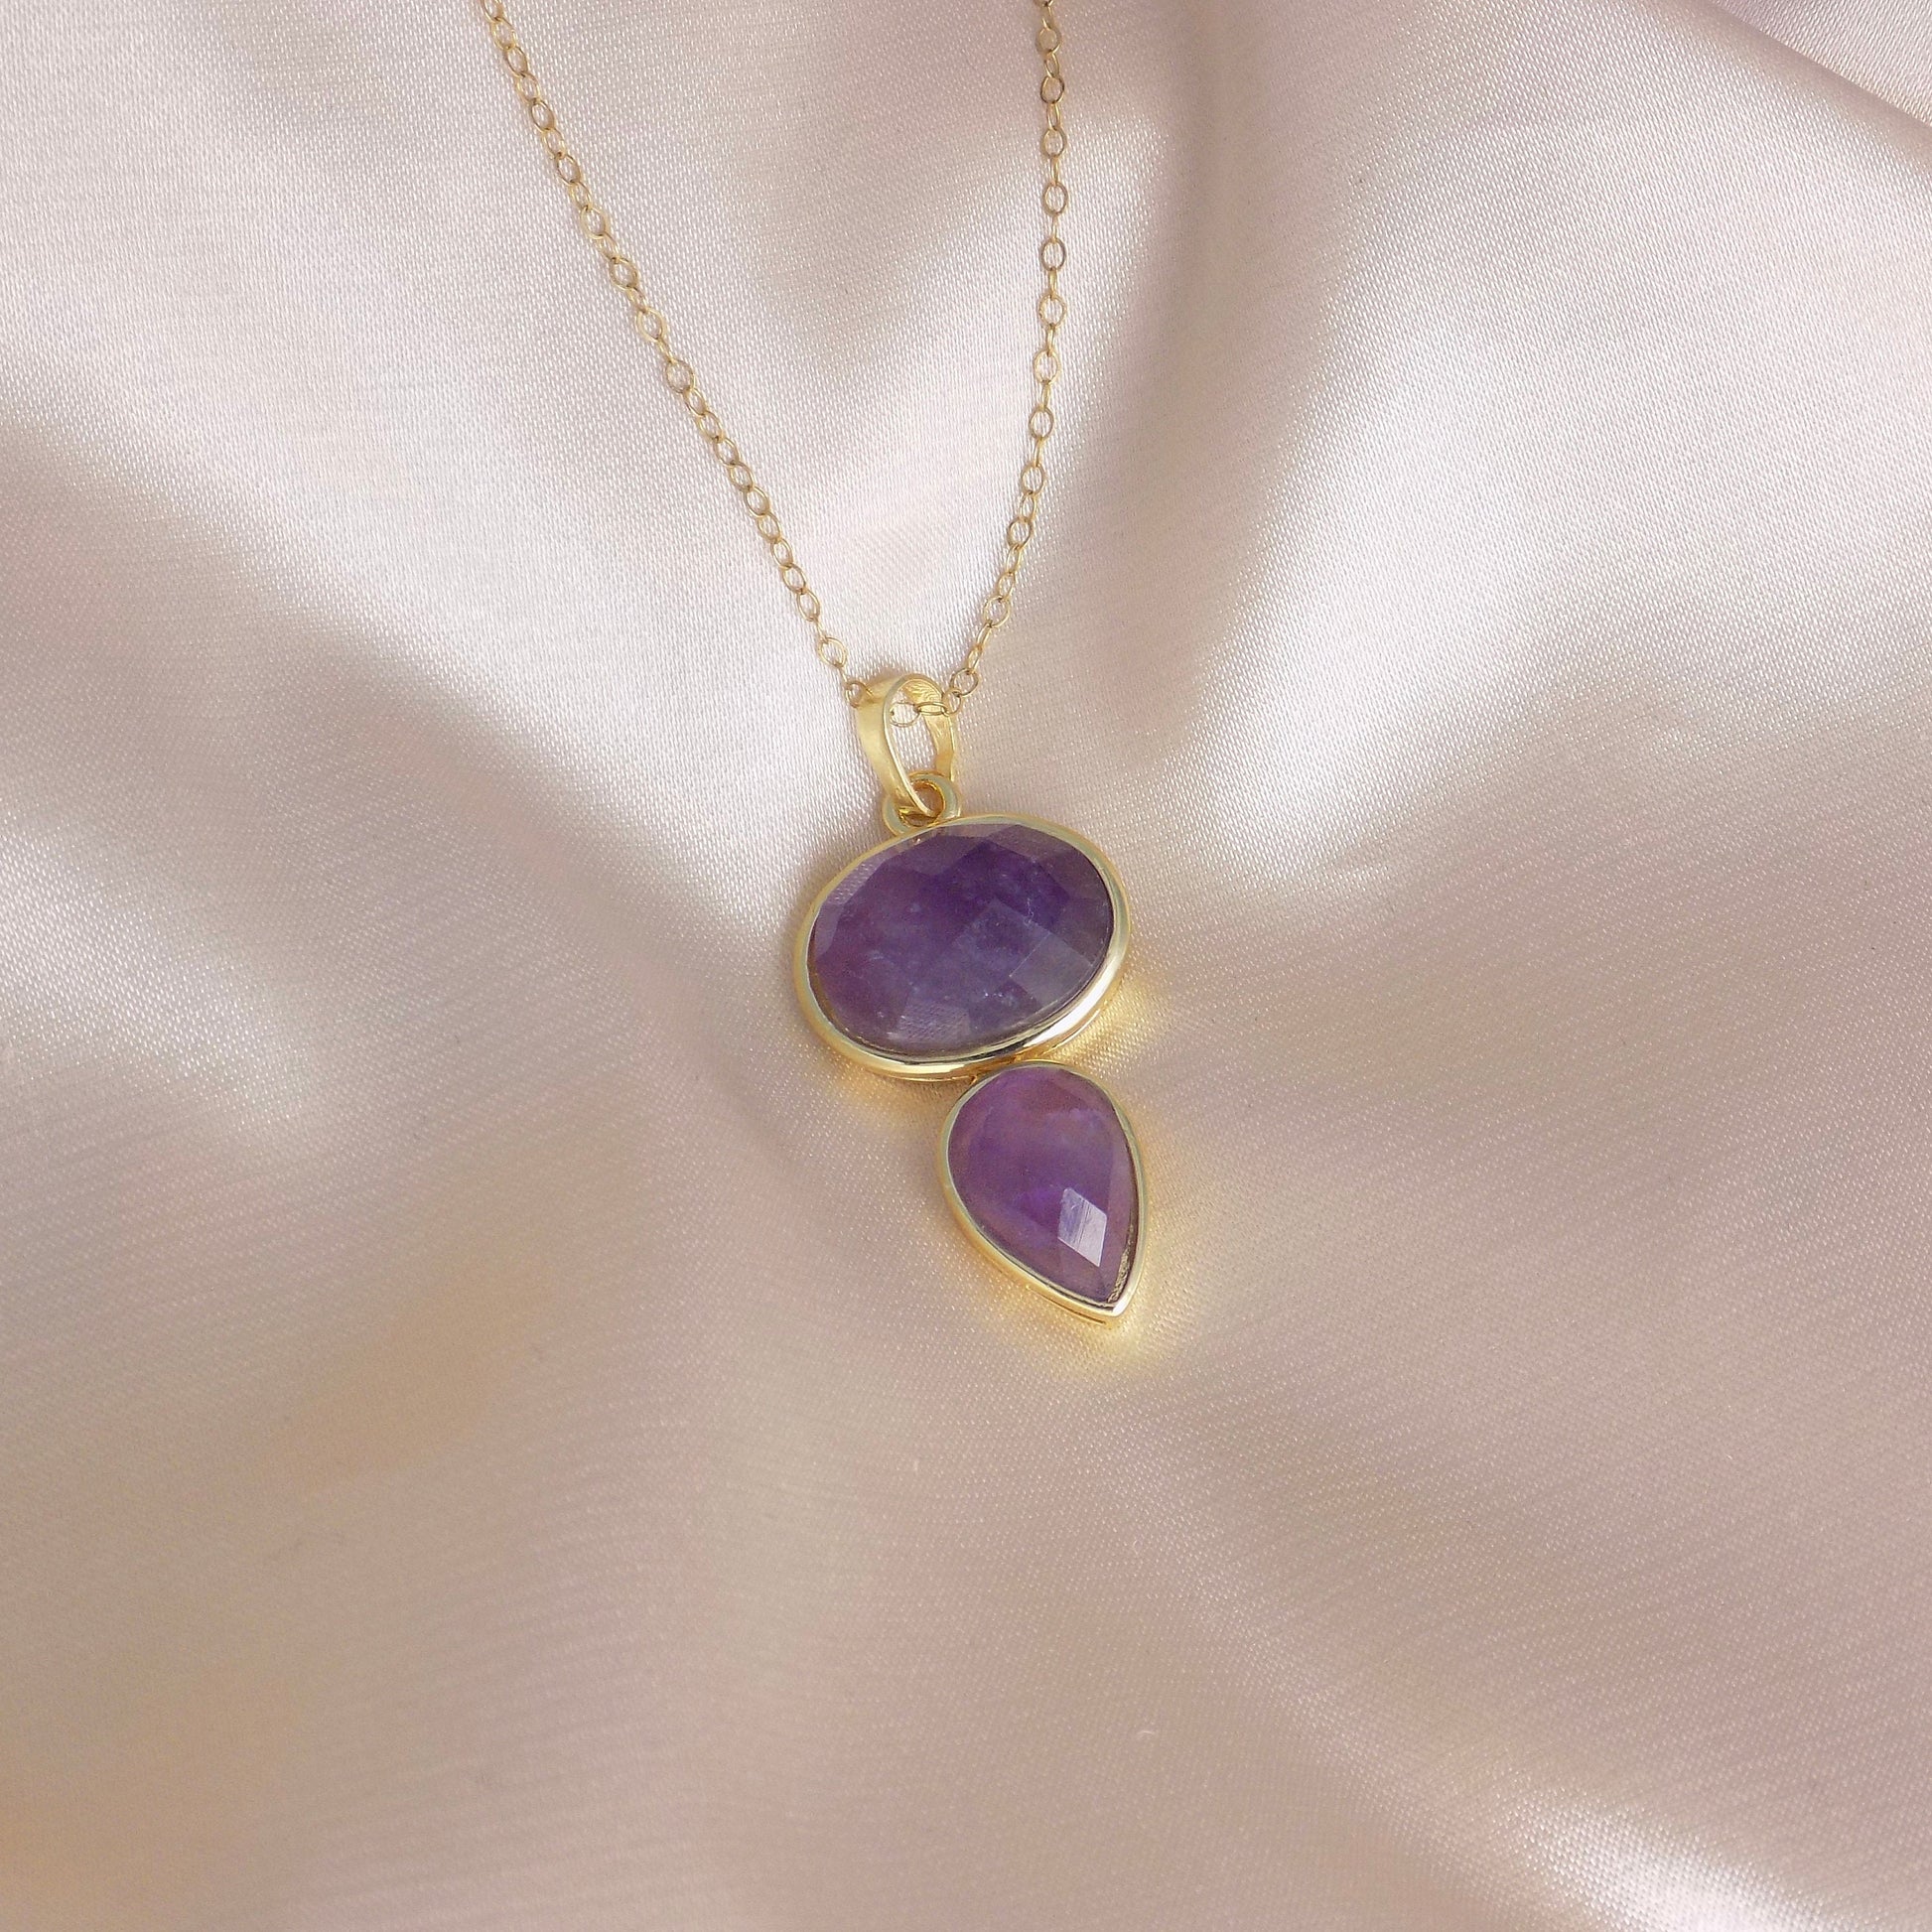 Unique Amethyst Crystal Pendant Necklace Gold, Gift For Her, M7-48